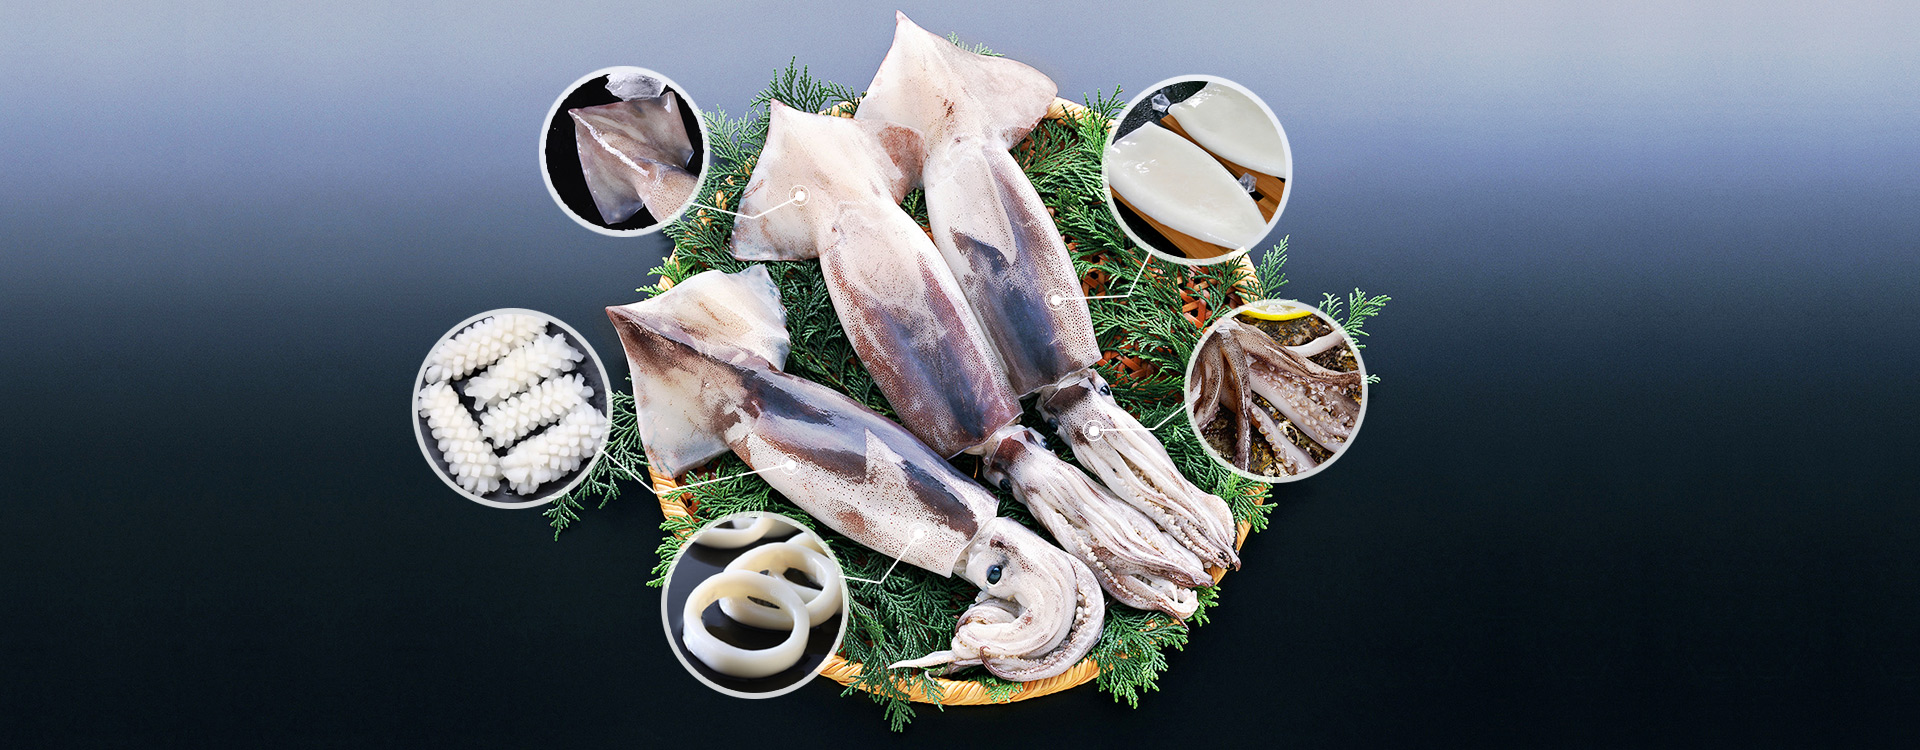 Low price Giant squid supplier(s) china